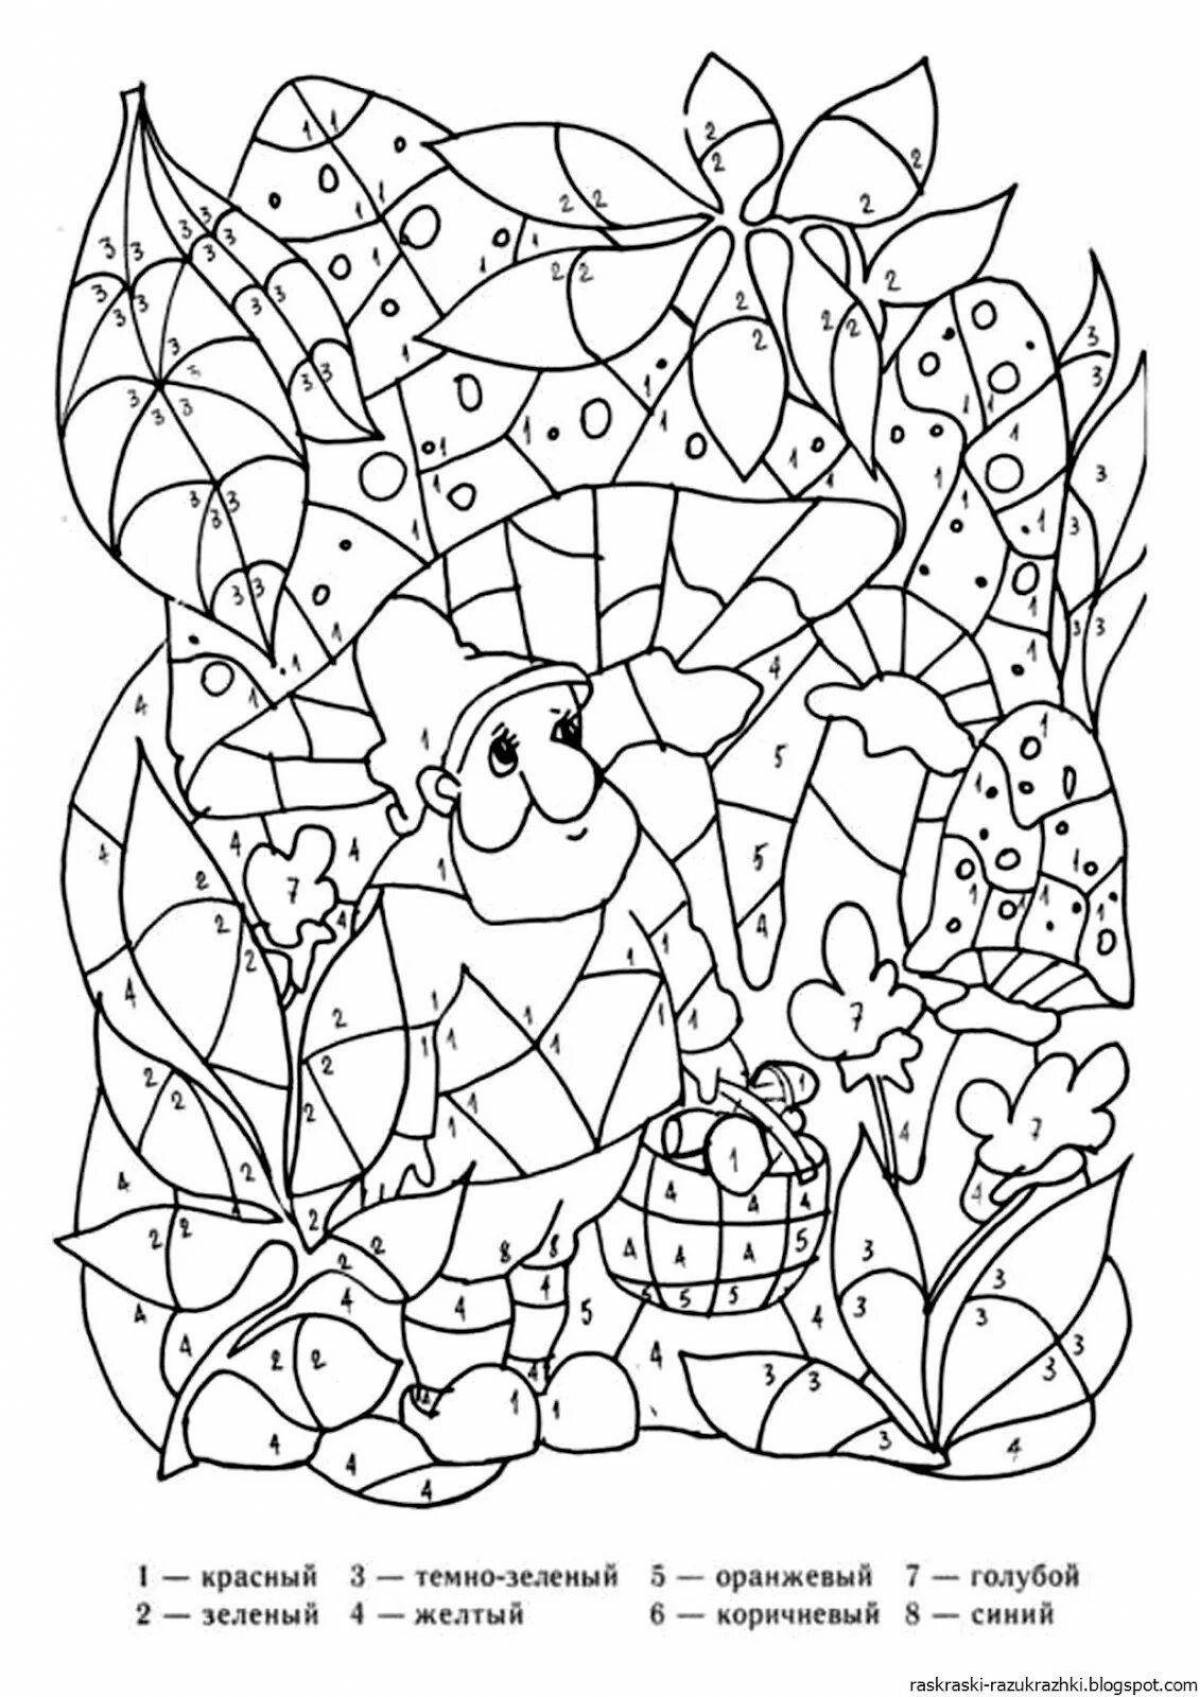 Fun coloring book for kids 8-12 years old